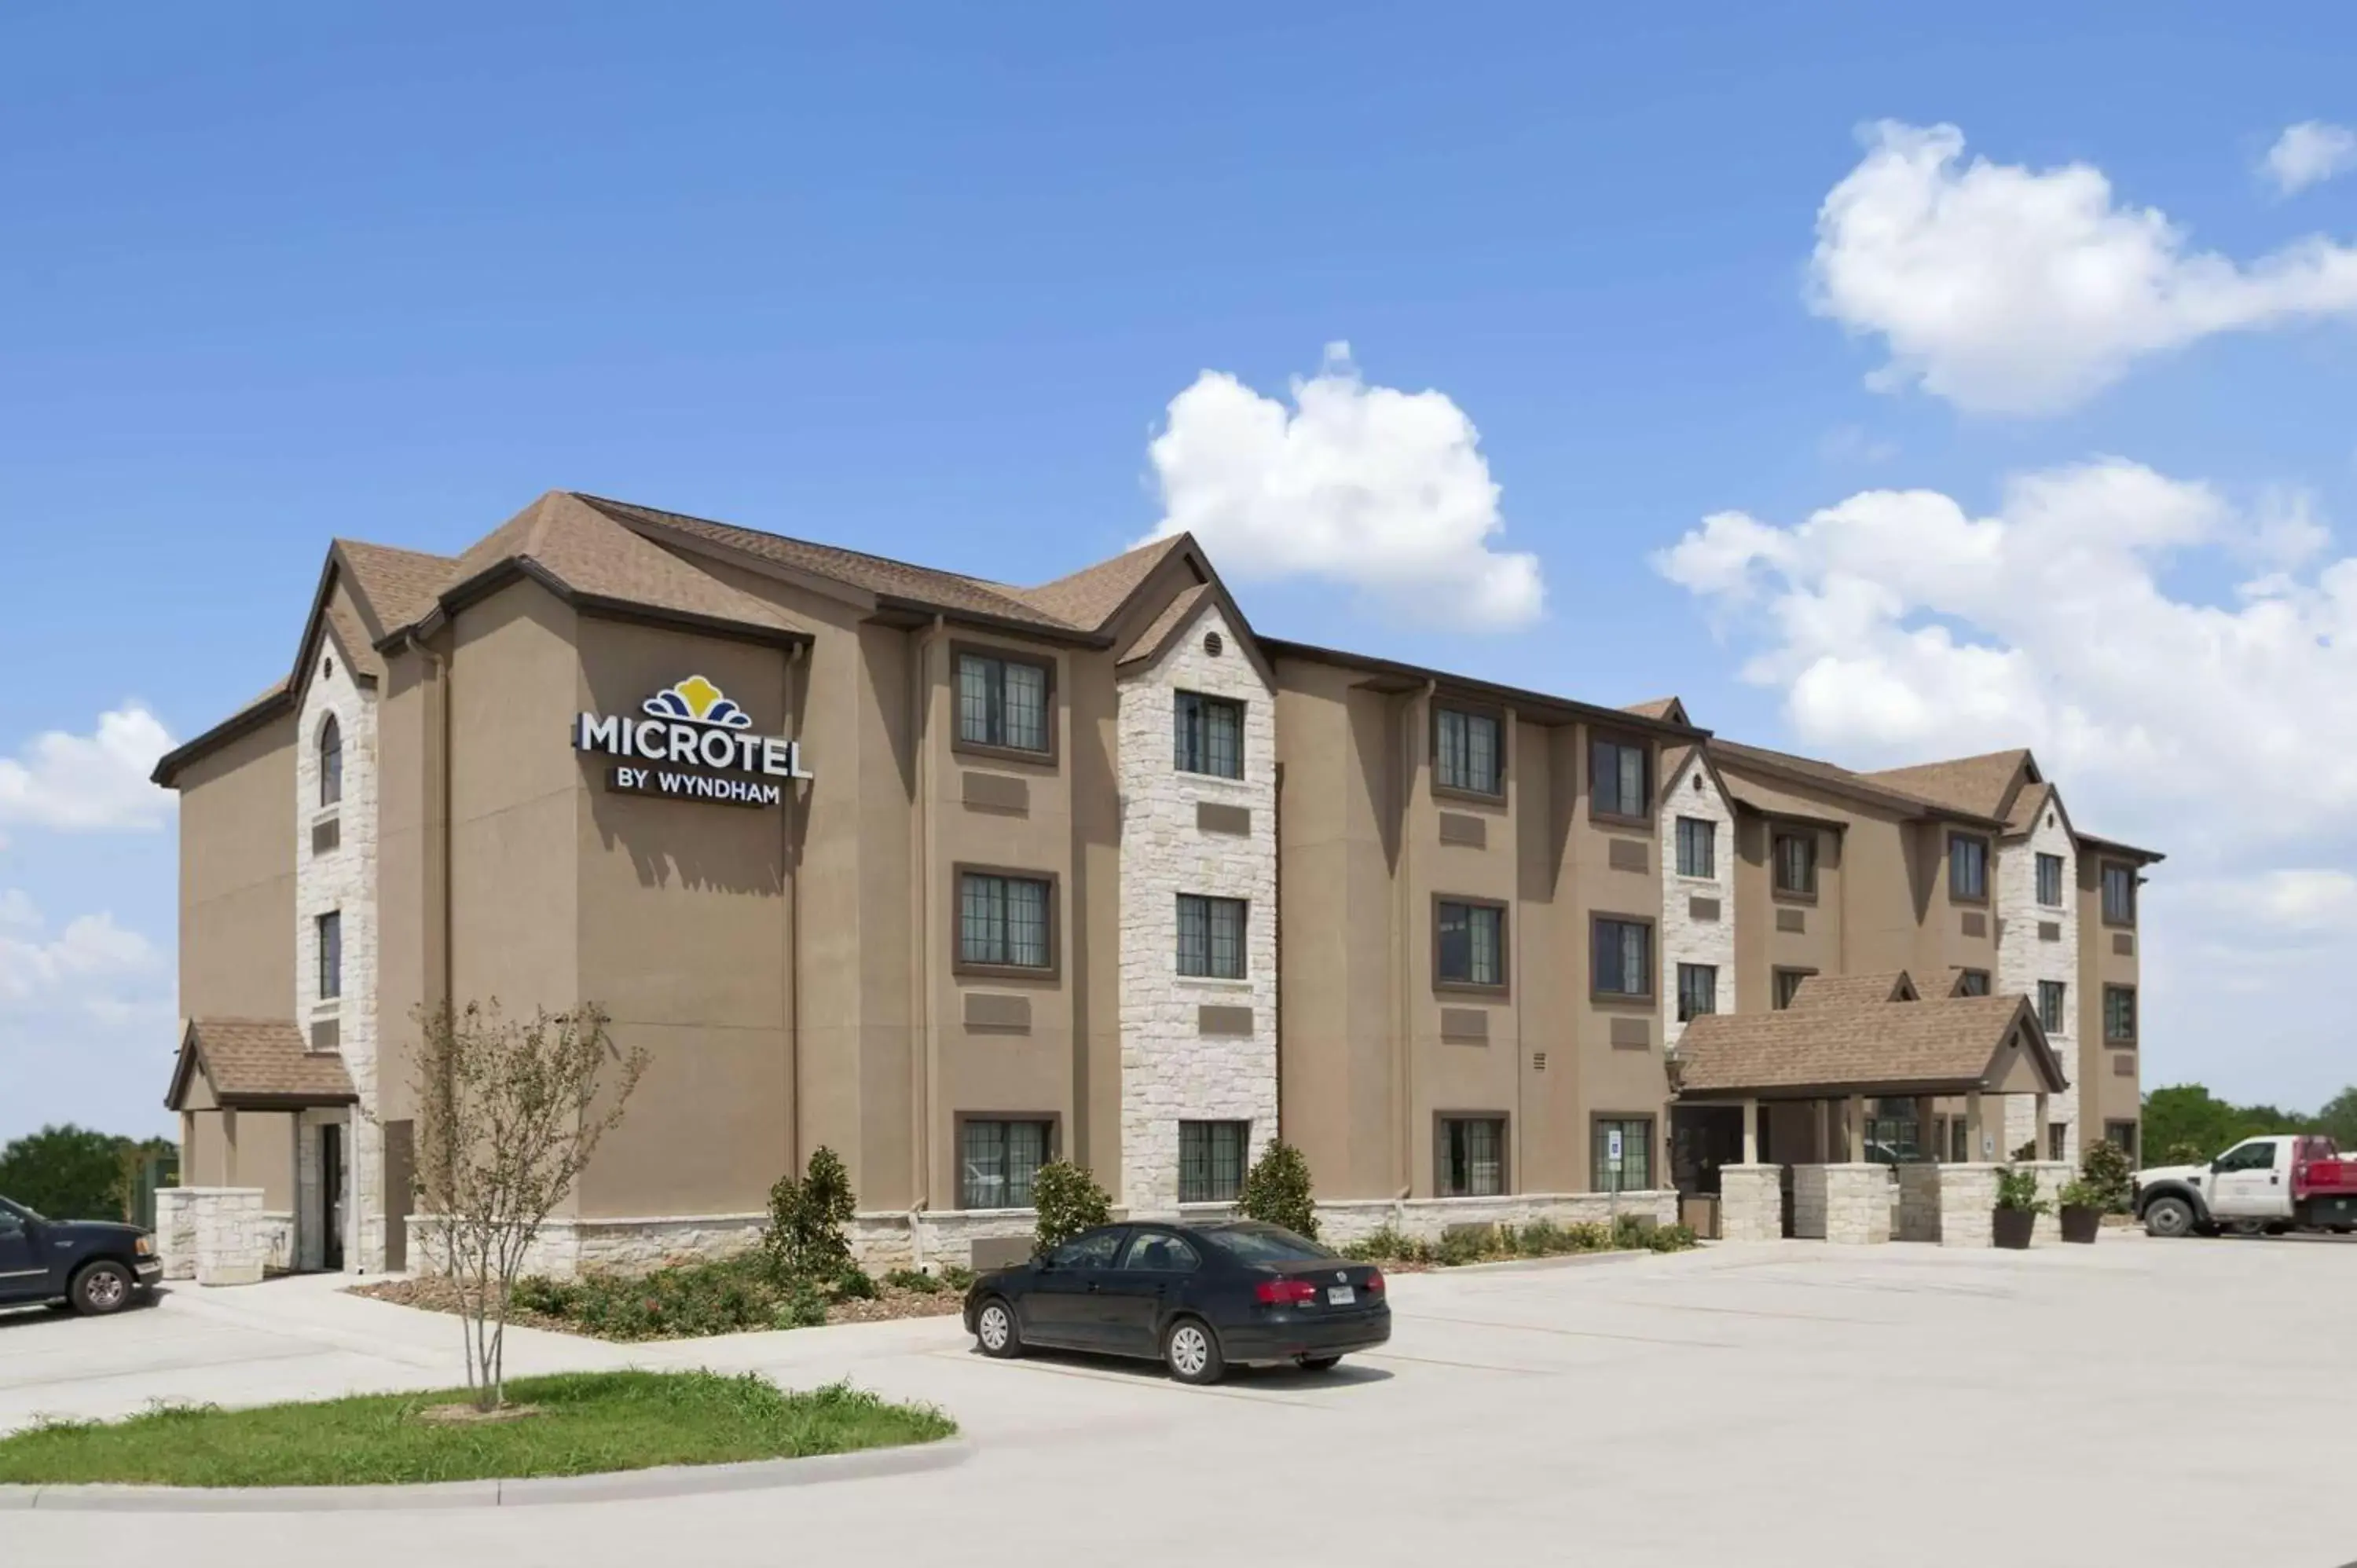 Property Building in Microtel Inn & Suites Gonzales TX